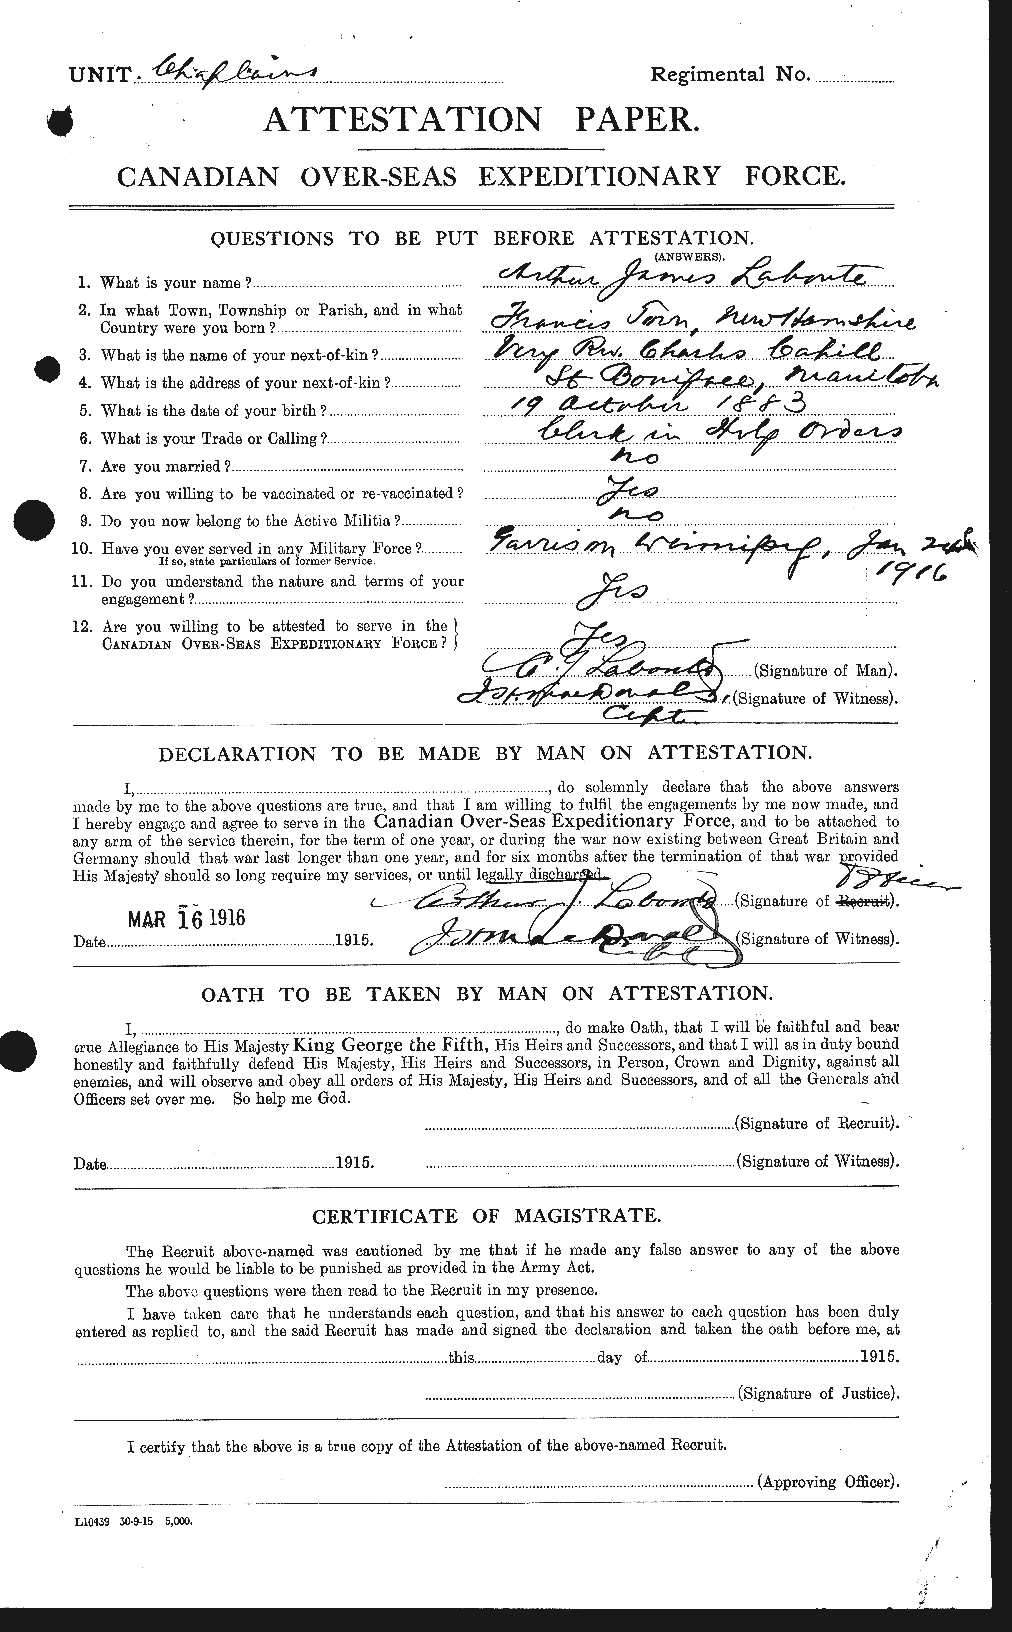 Personnel Records of the First World War - CEF 441774a